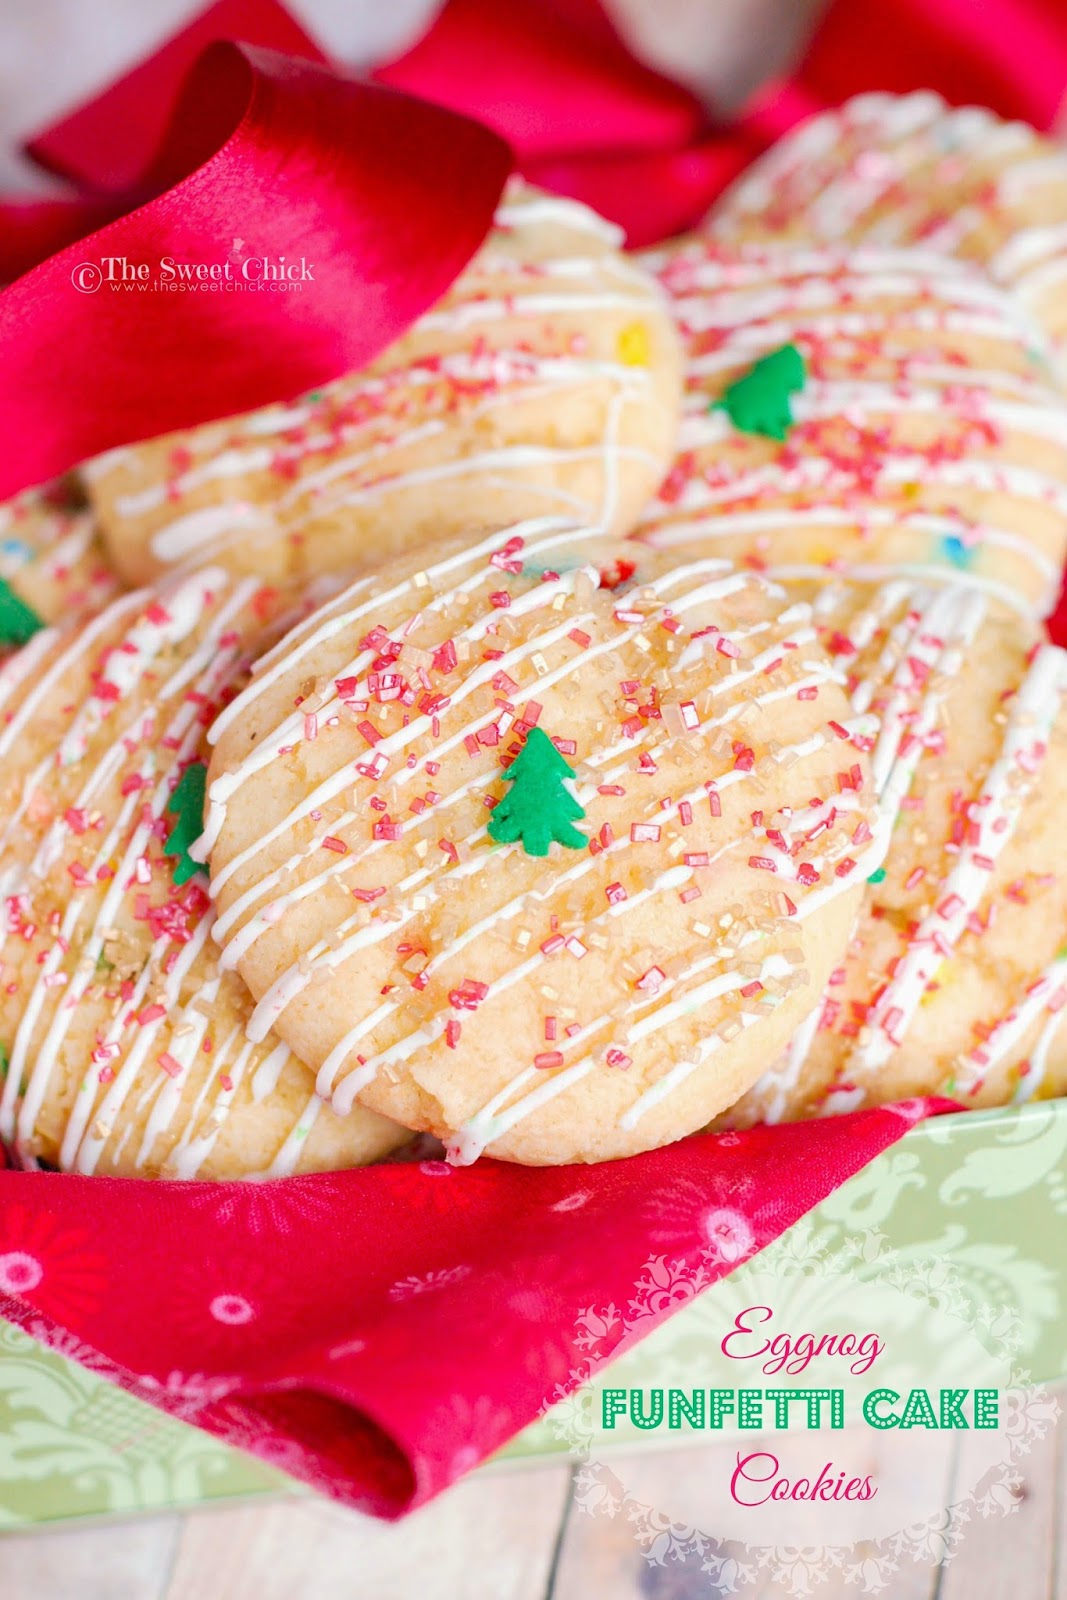 Eggnog Funfetti Cake Cookies by The Sweet Chick